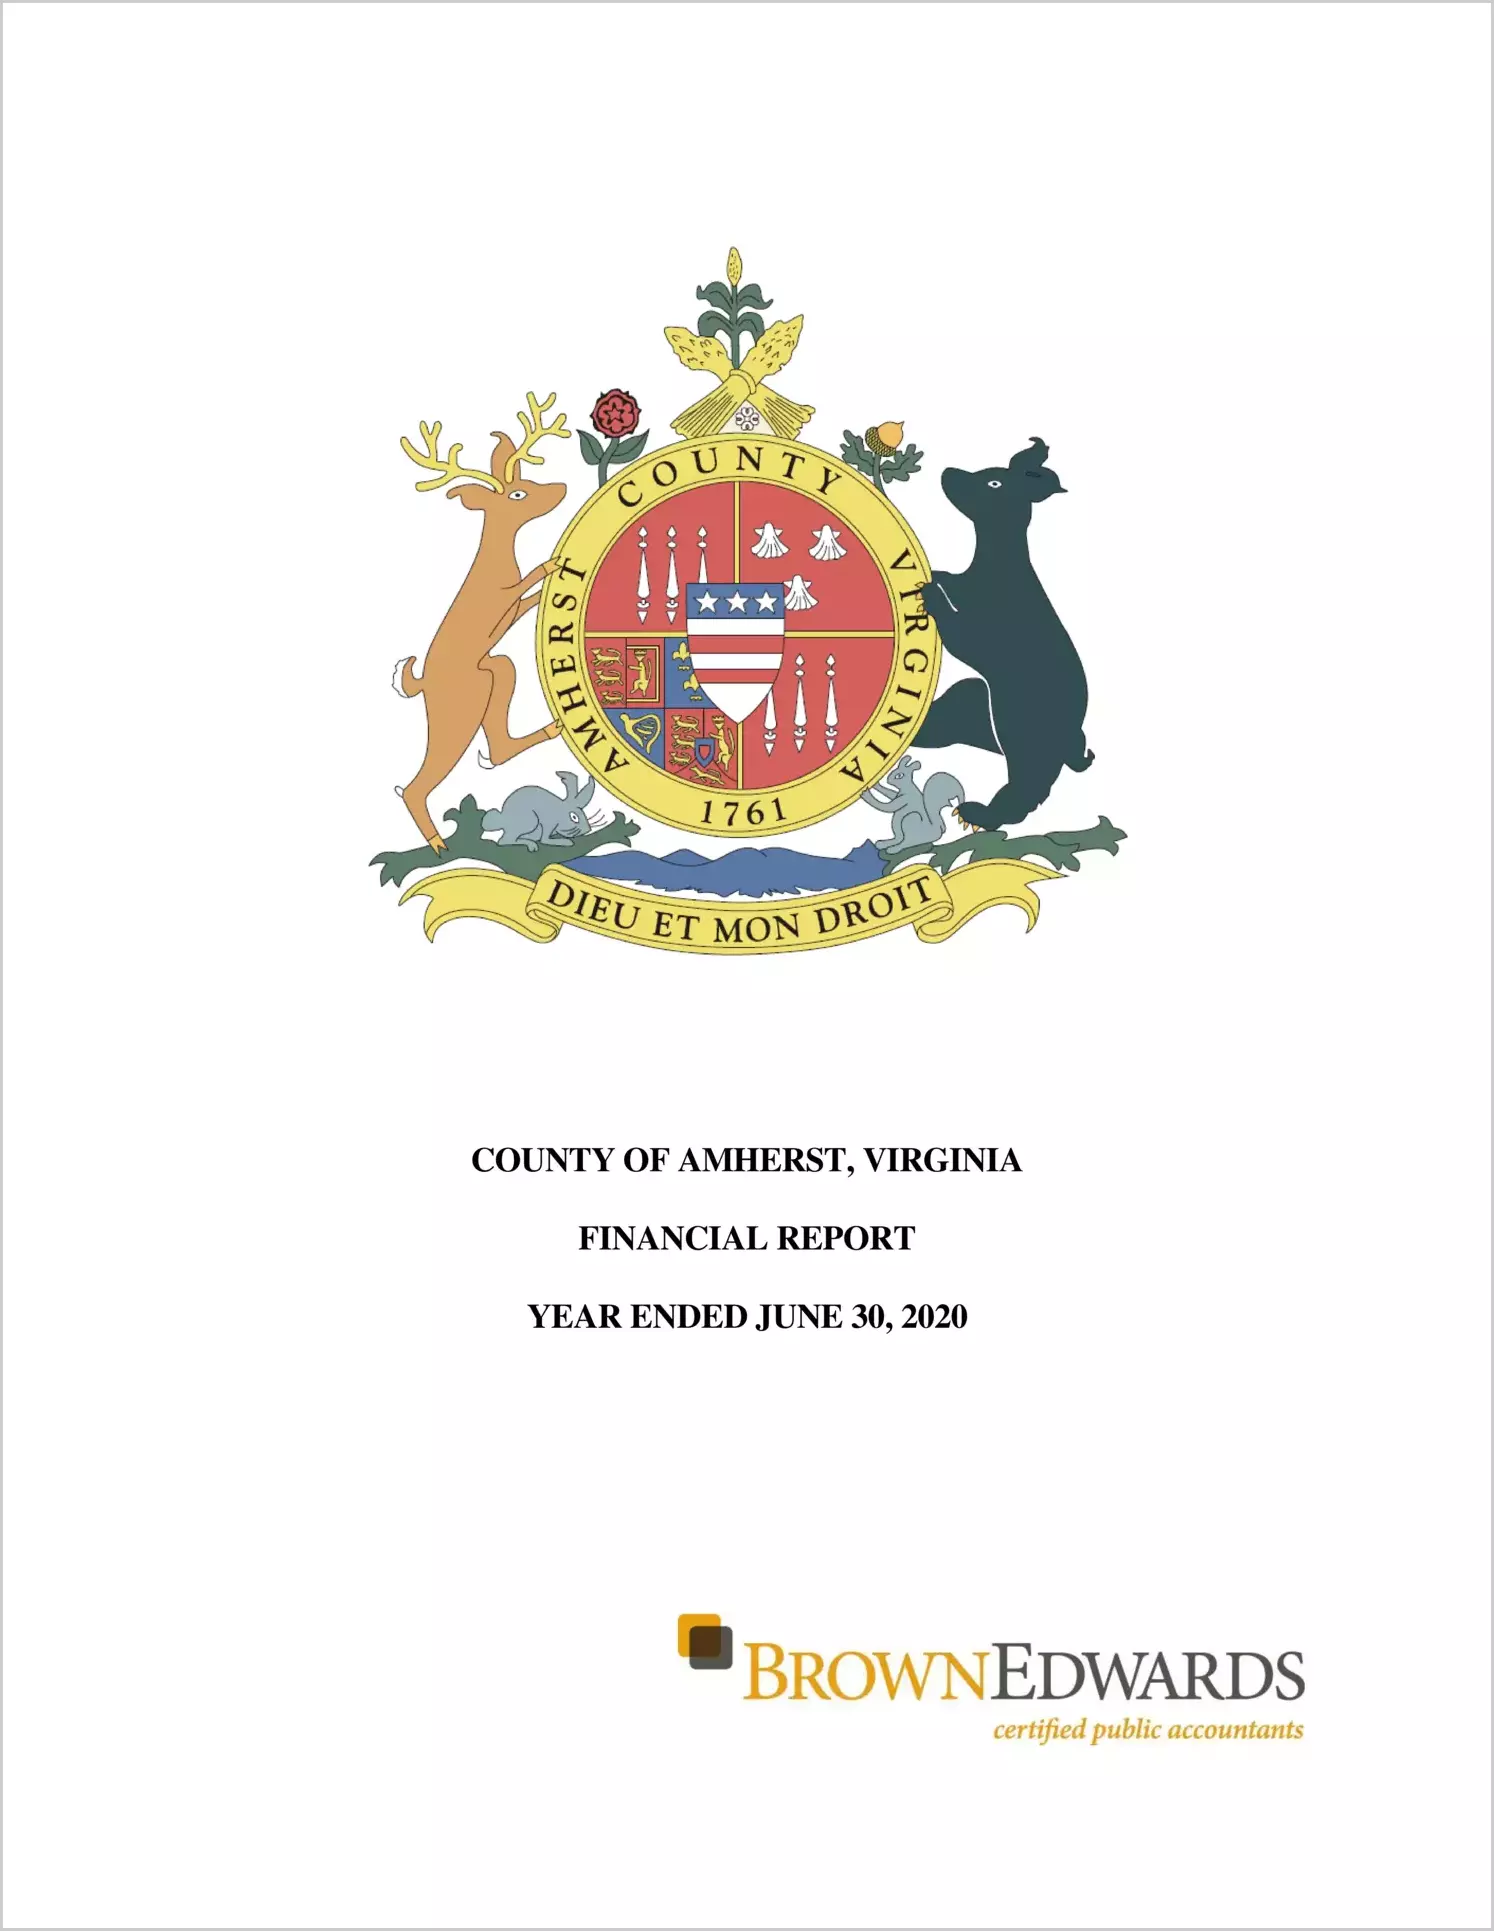 2020 Annual Financial Report for County of Amherst